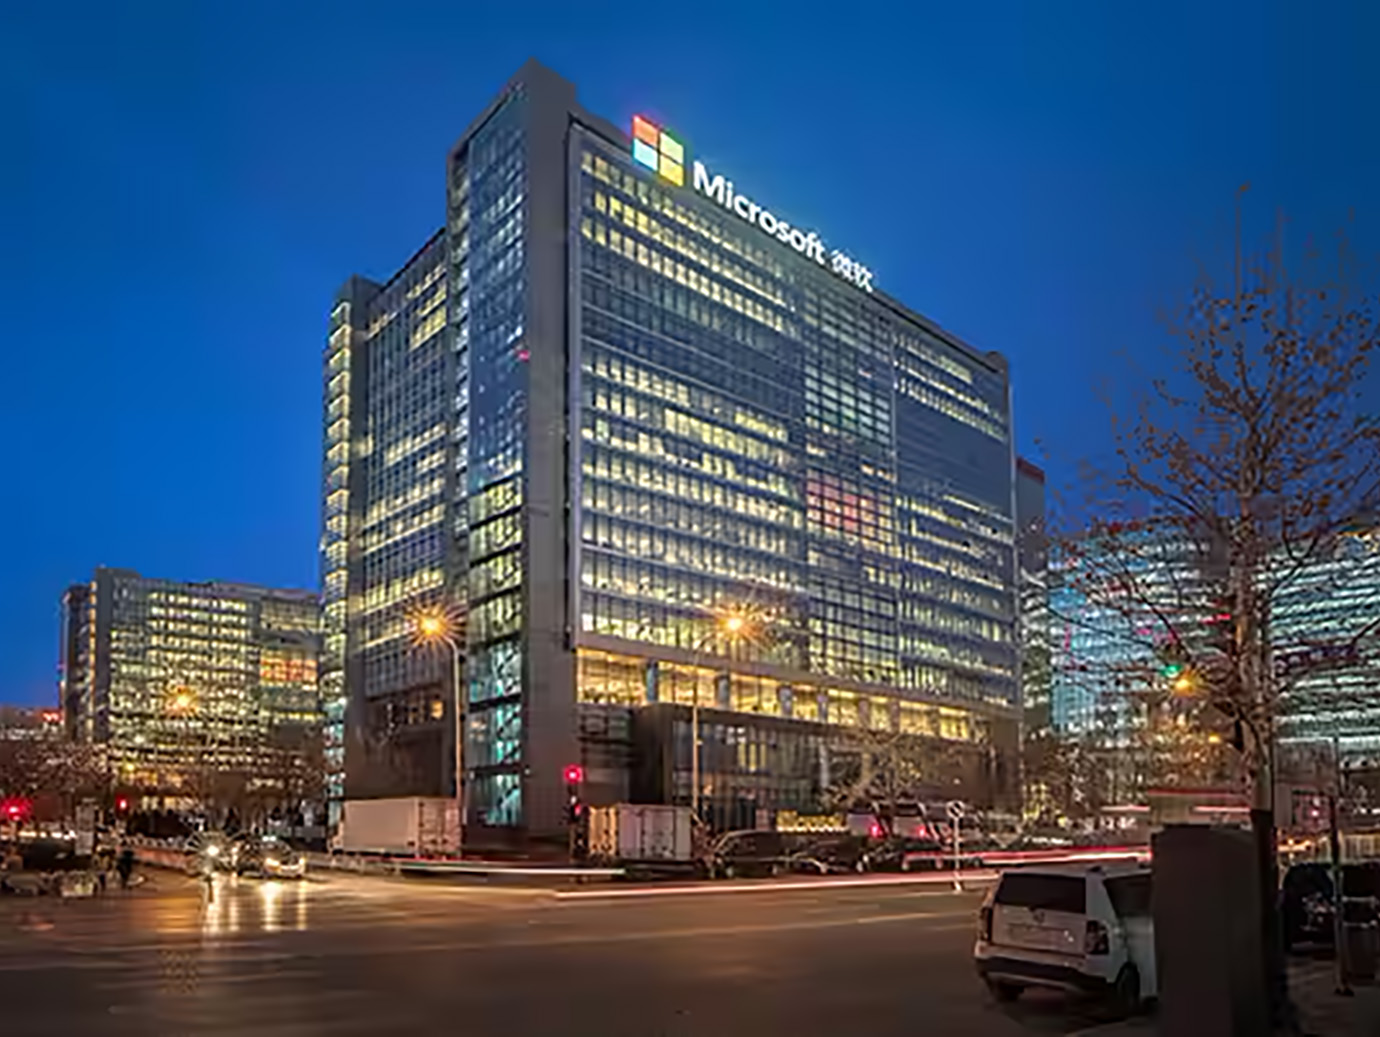 The Microsoft office in Beijing lit up during night-time